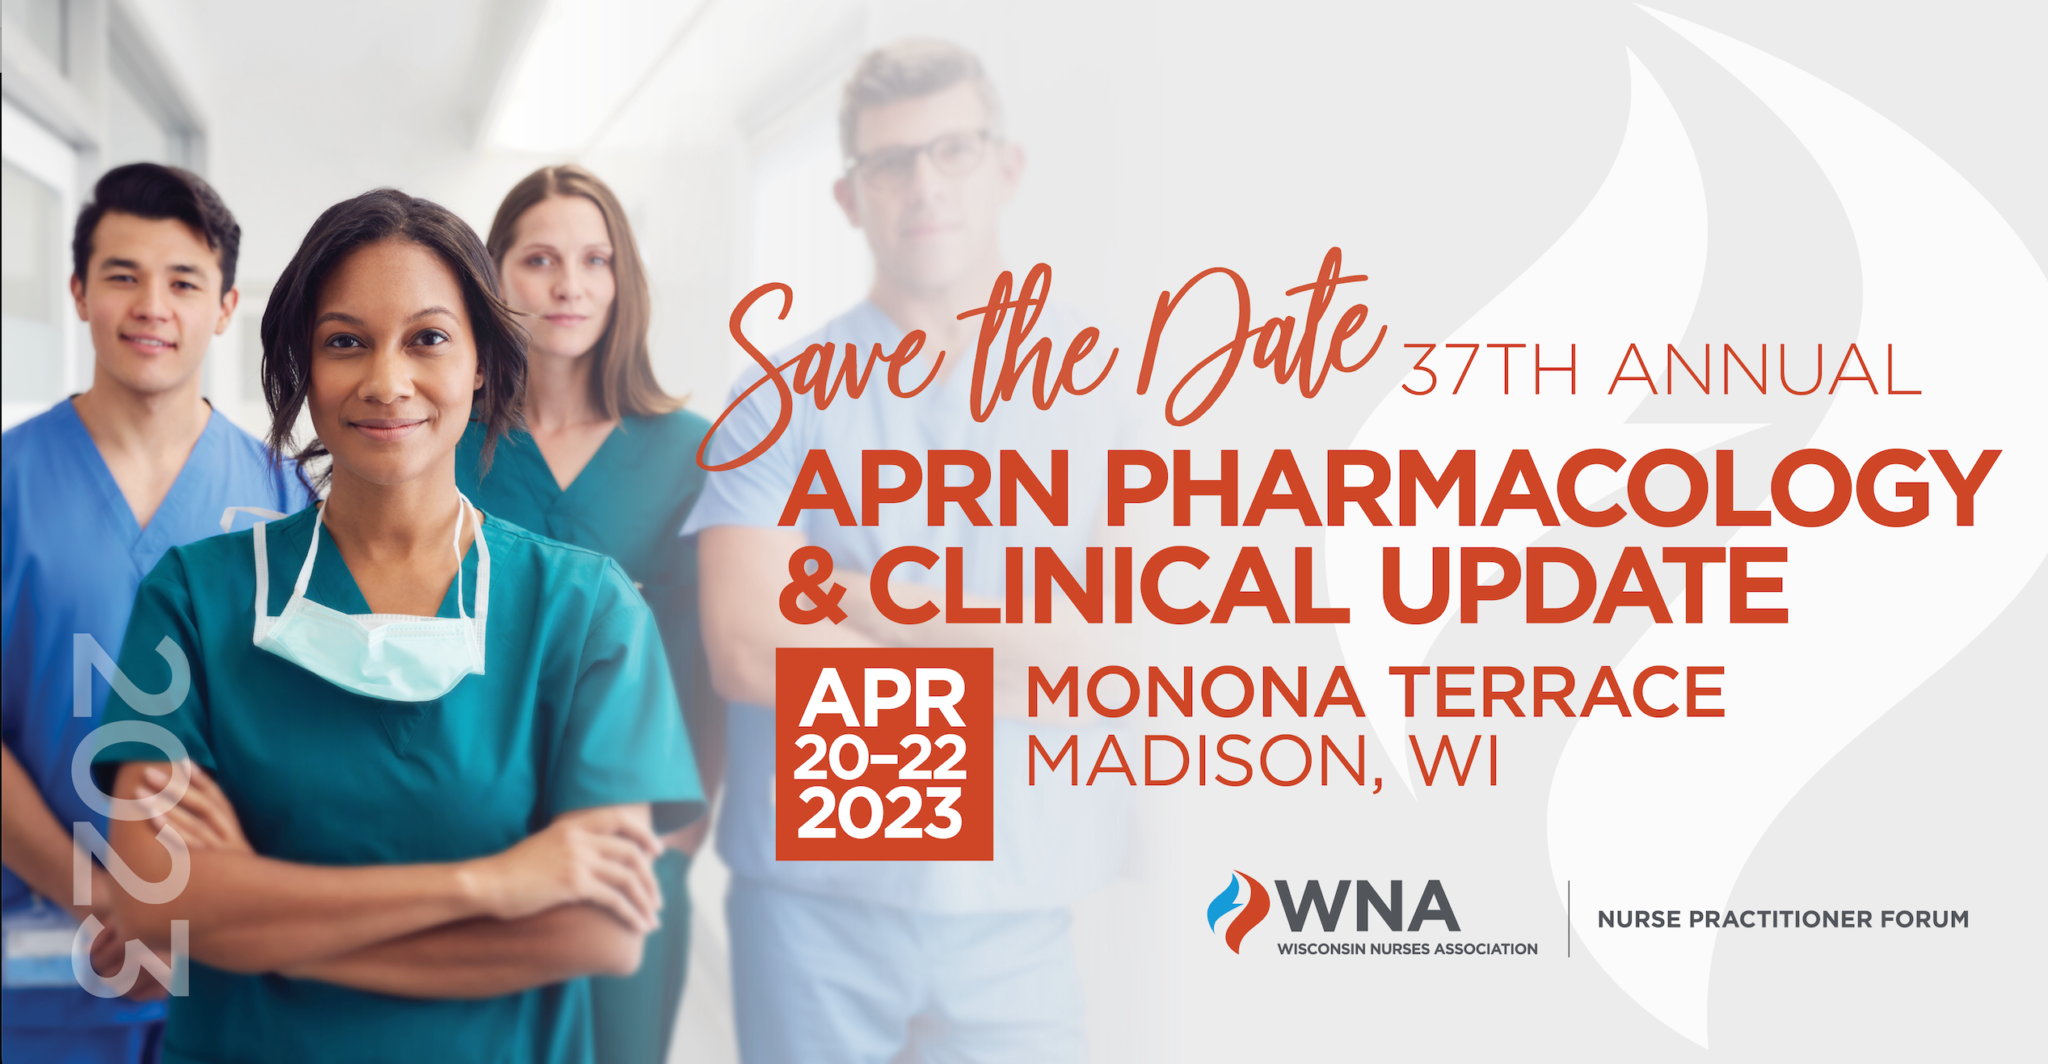 2023 APRN Pharmacology & Clinical Update Wisconsin Nurses Association